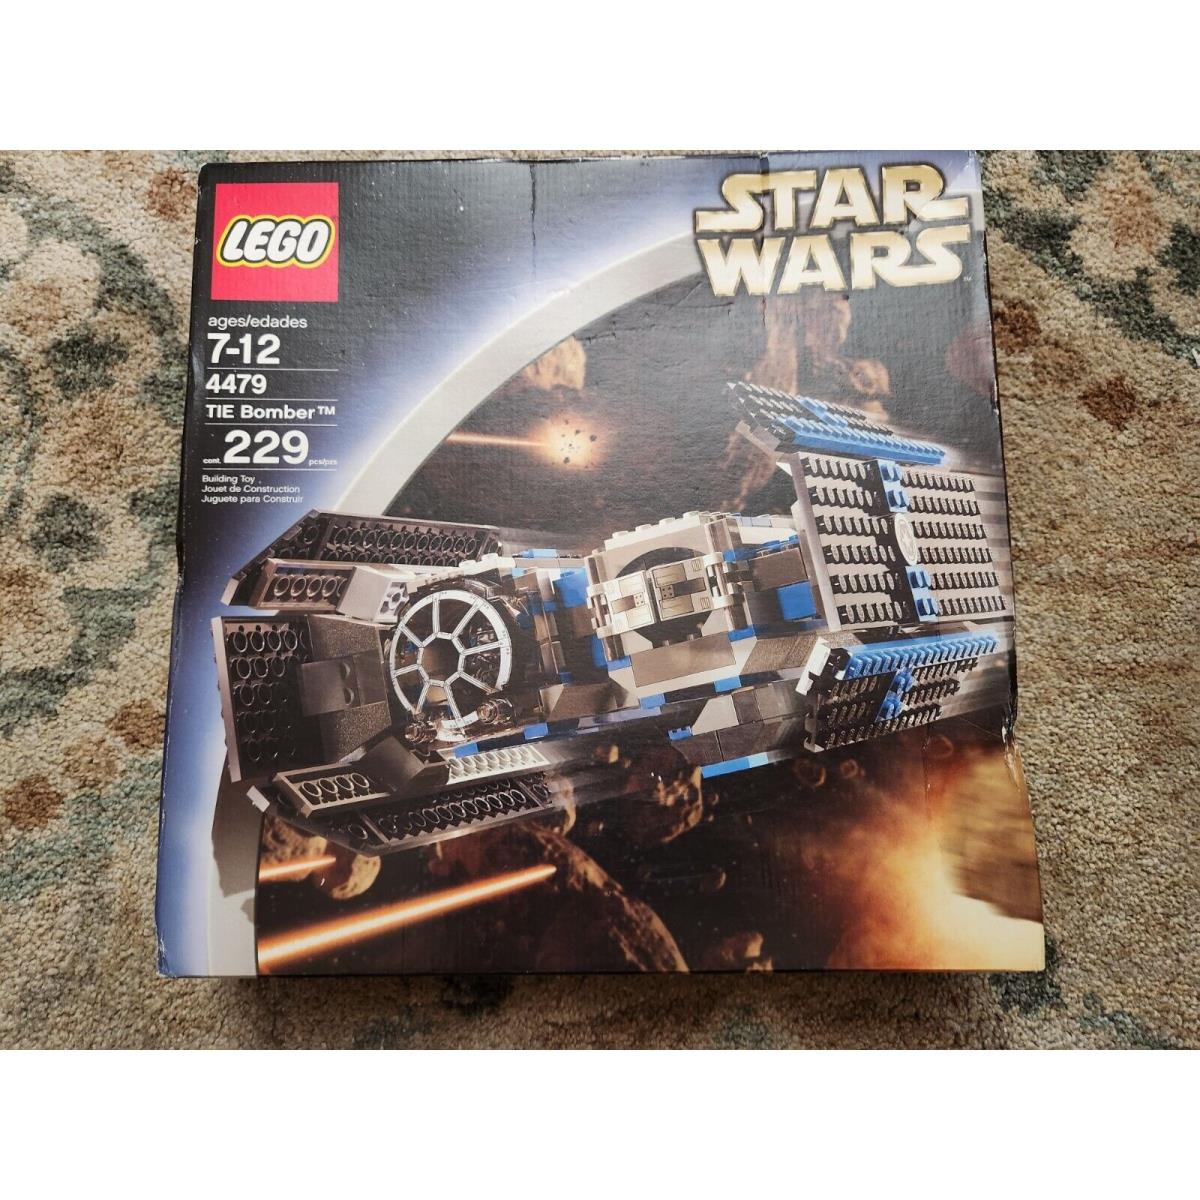 Wear and Creases Star Wars Lego 4479 Tie Bomber